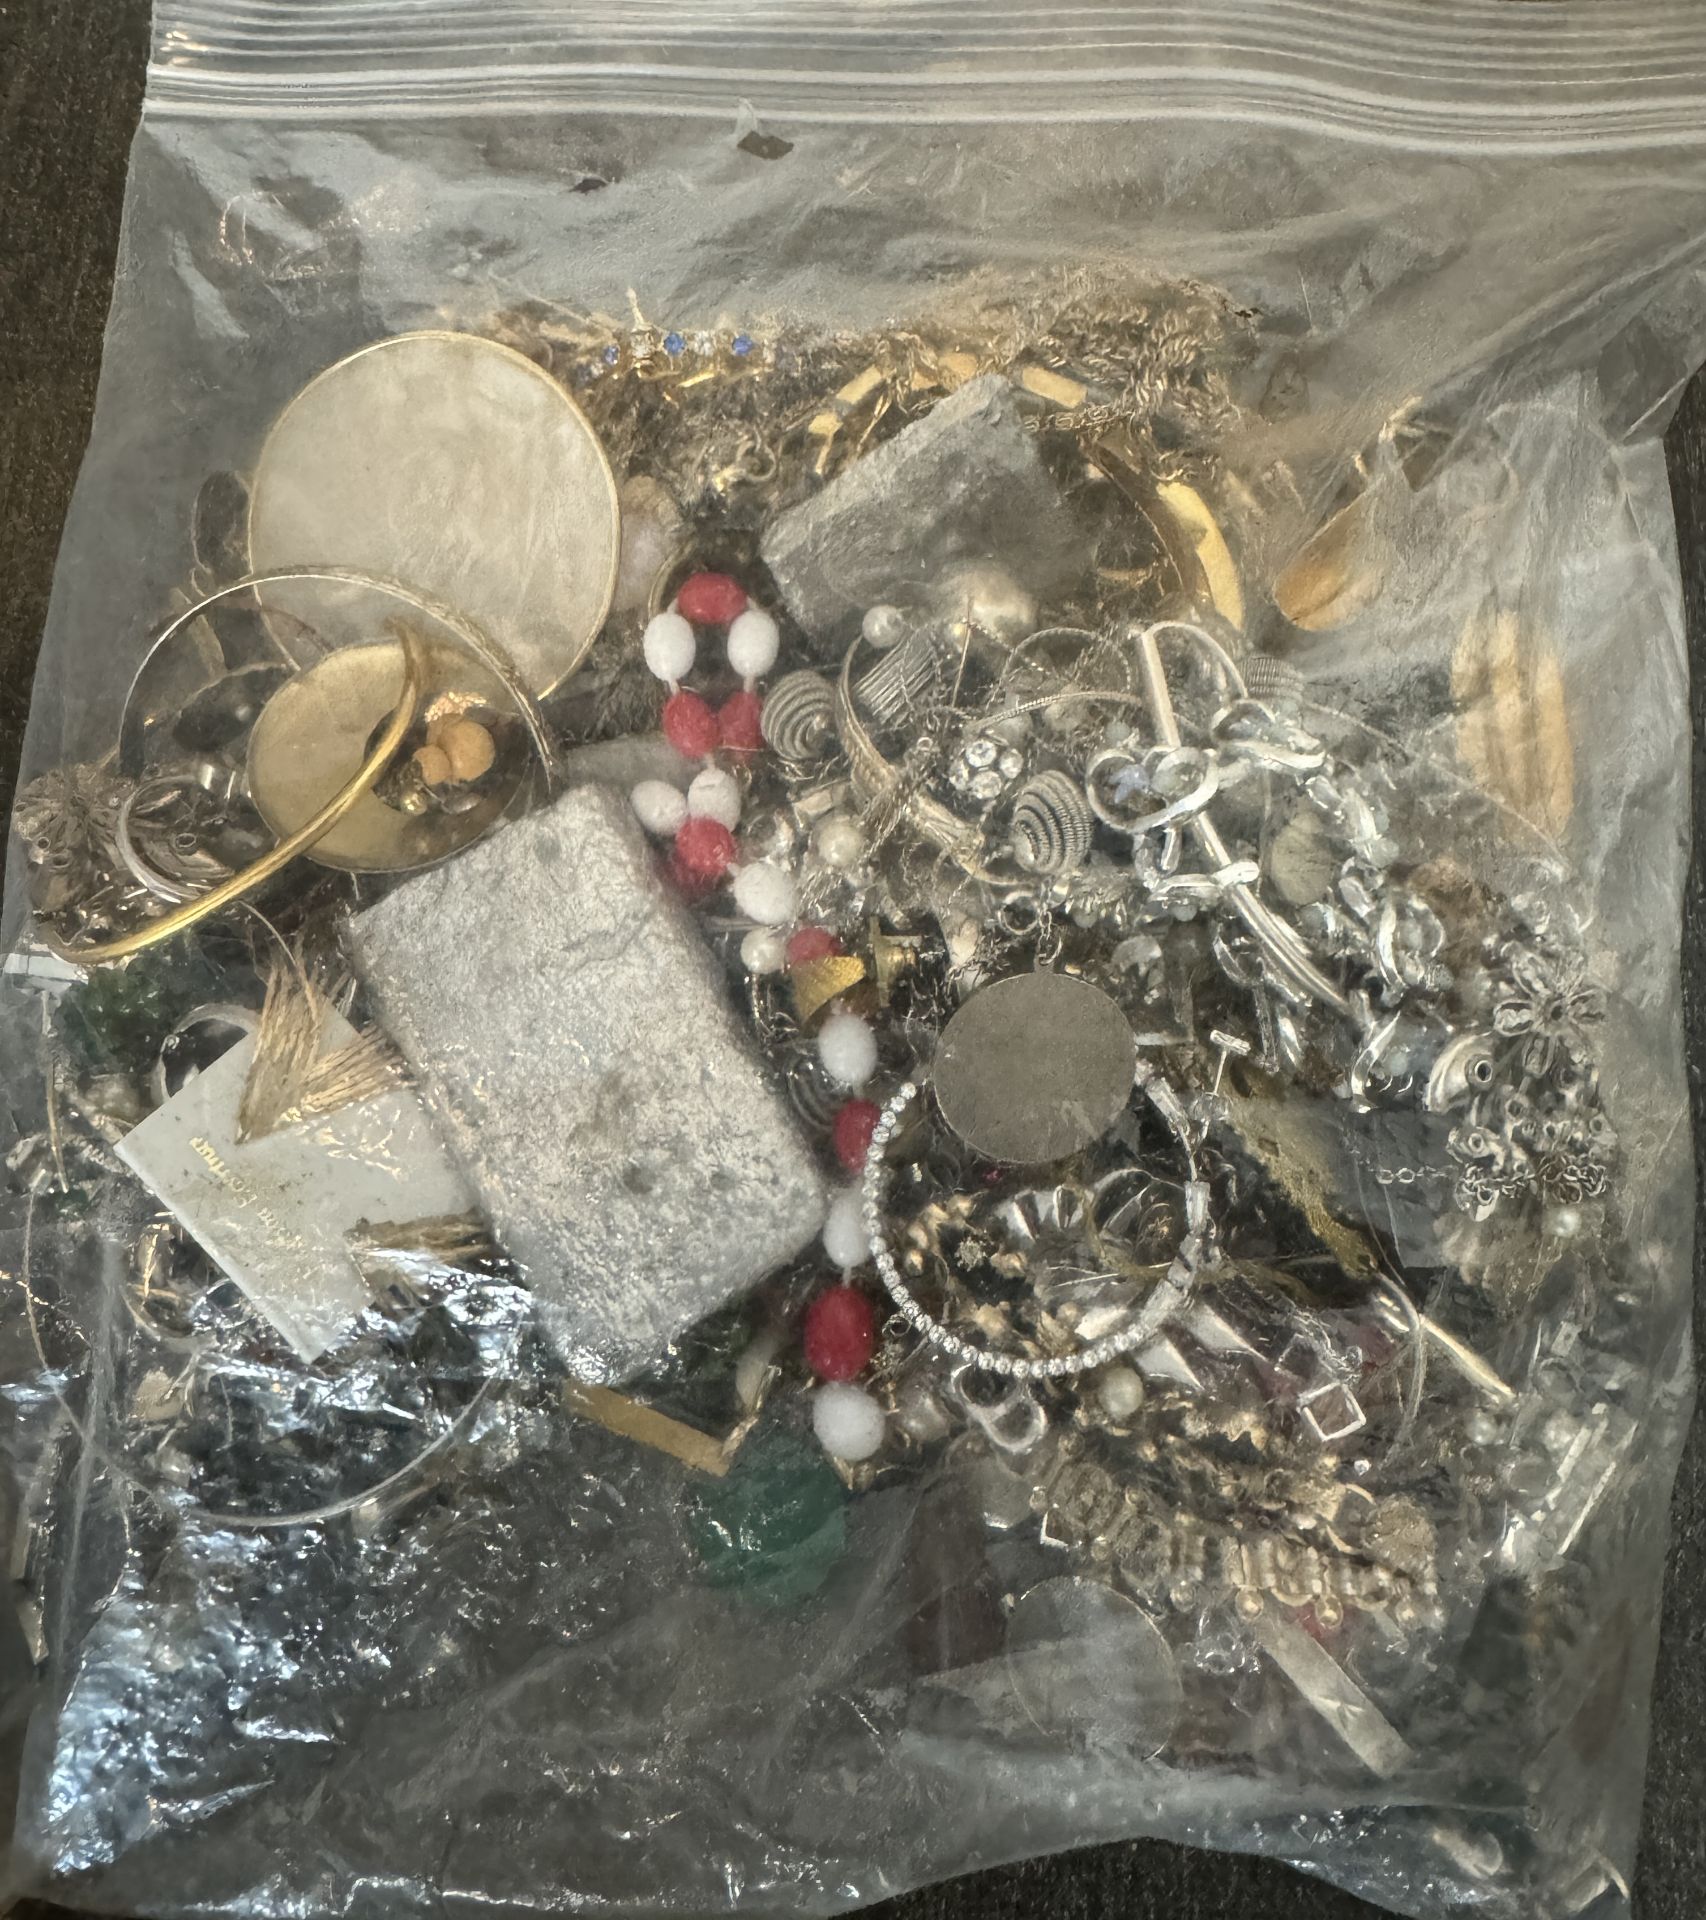 BAG OF MIXED UNSORTED JEWELRY / SOME SORT OF SILER BRICK INSIDE IT